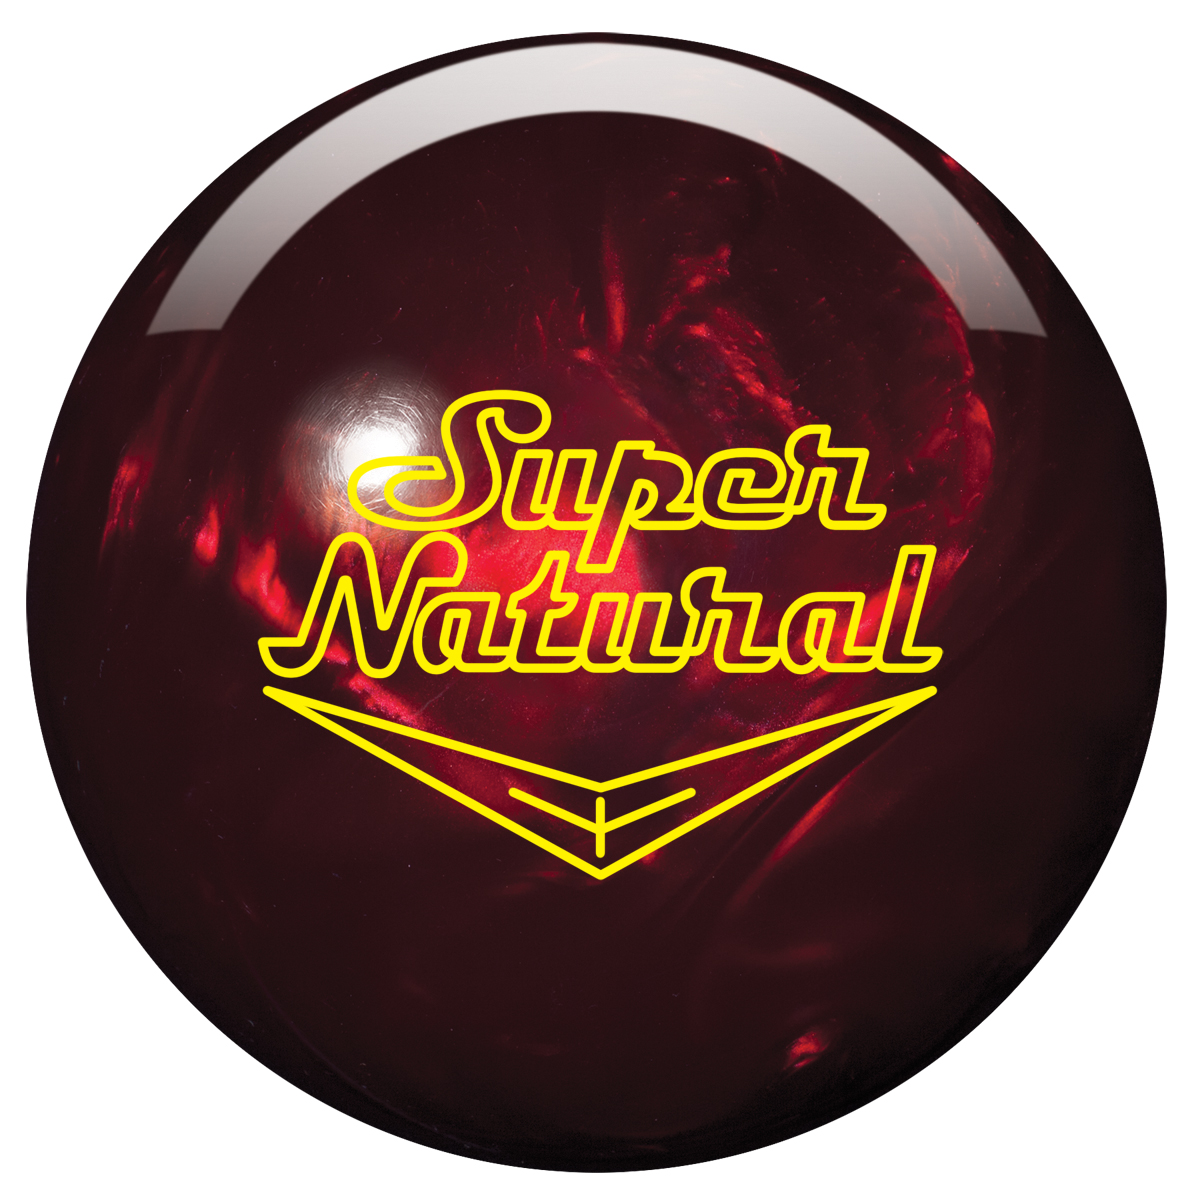 Storm Super Natural Bowling Ball Review with Digitrax Analysis